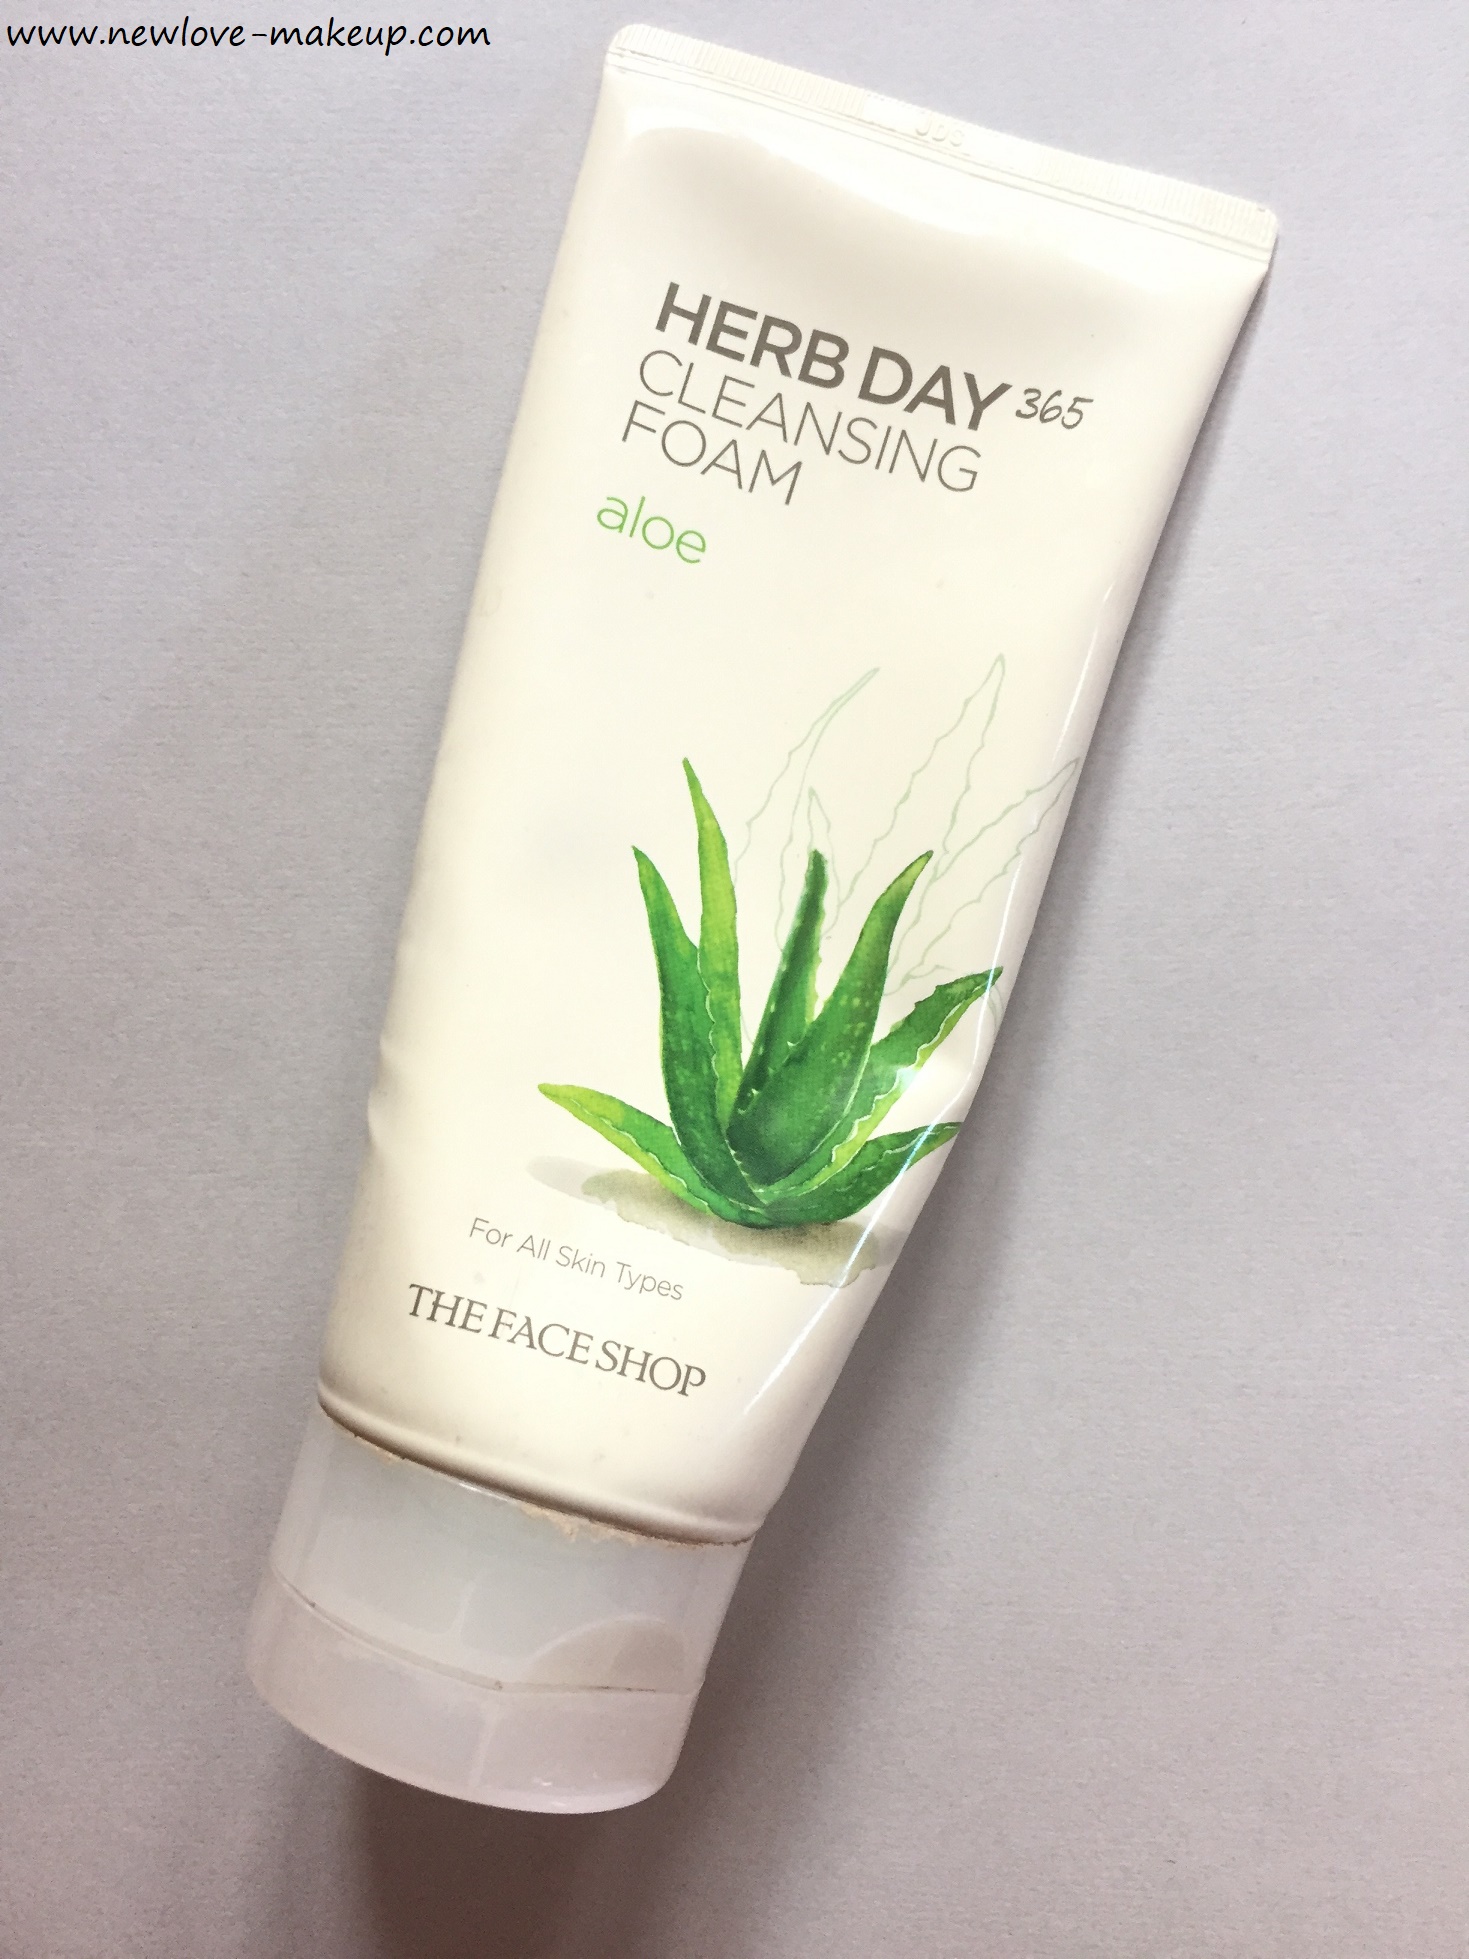 The Face Shop Herb Day 365 Cleansing Foam Aloe Face Wash Review